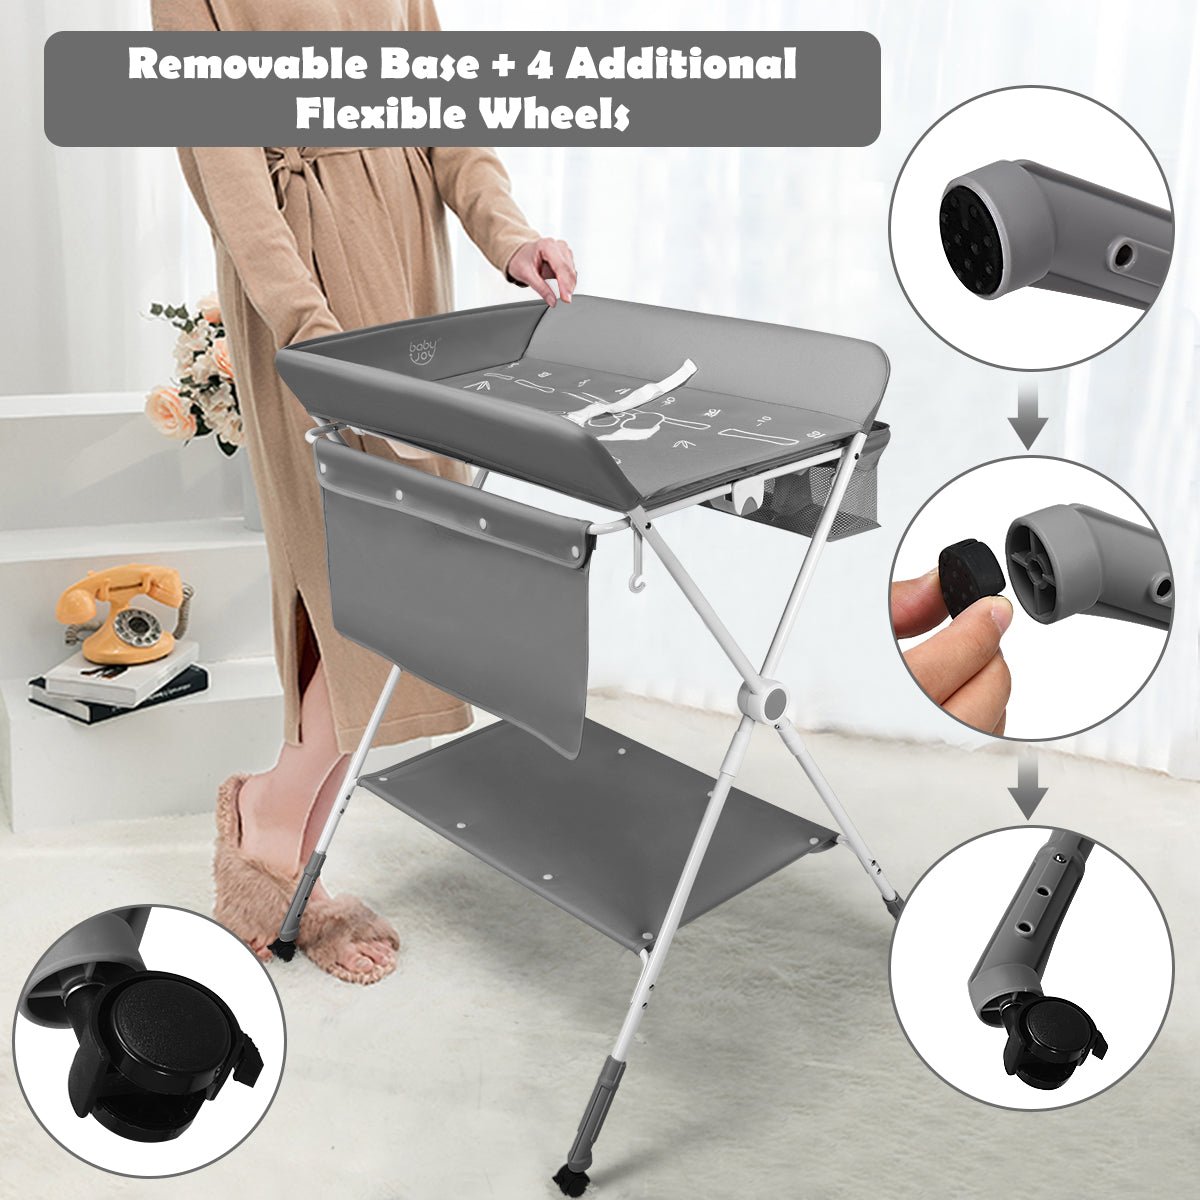 Innovative Grey Diaper Station - Portable Changing Solution for Families